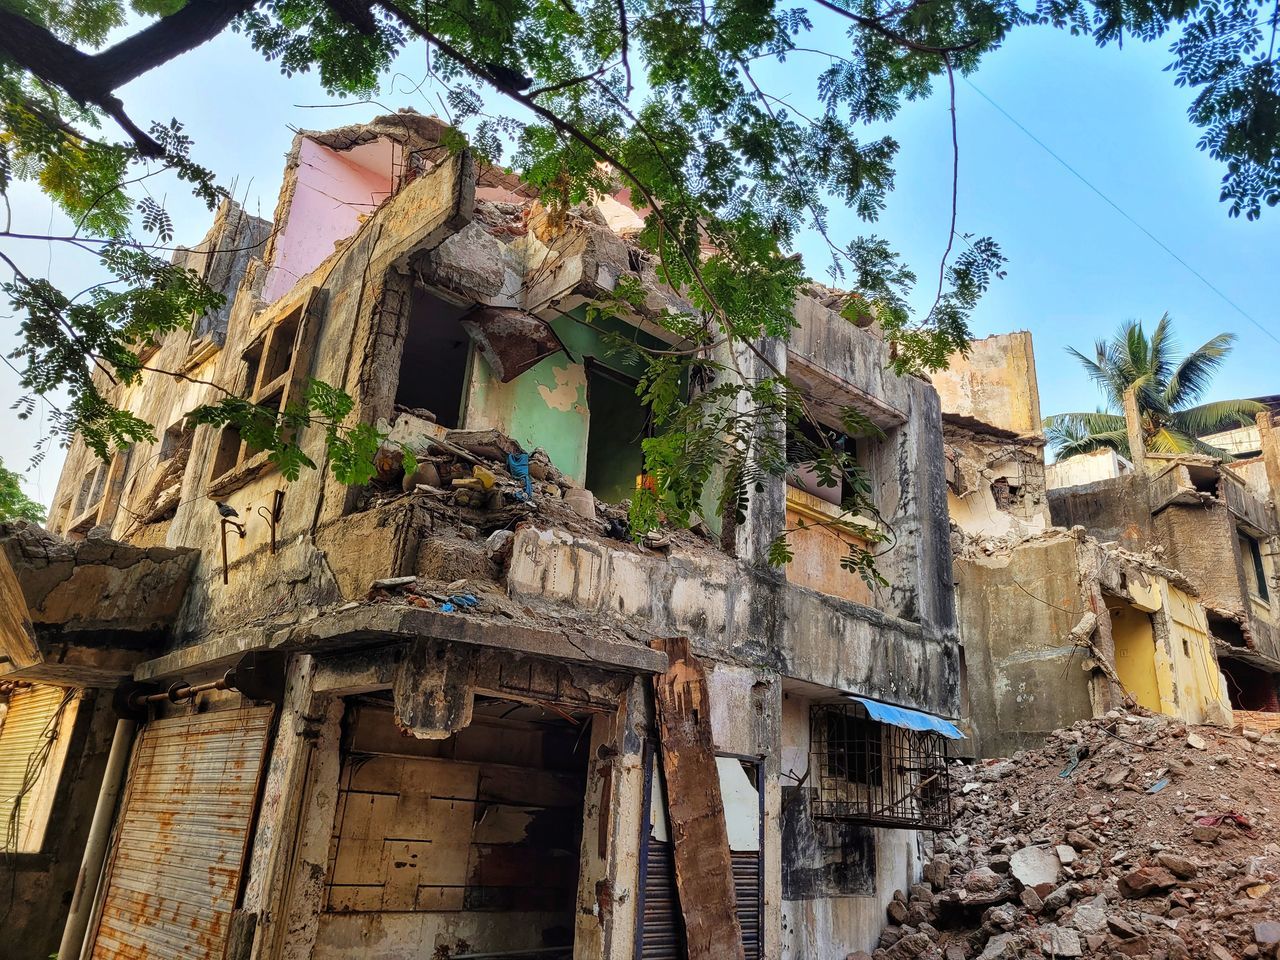 architecture, built structure, building exterior, tree, building, plant, nature, village, low angle view, house, ruins, no people, day, residential district, history, sky, outdoors, old, town, damaged, the past, abandoned, city, demolition, ruined, rundown, travel destinations, neighbourhood